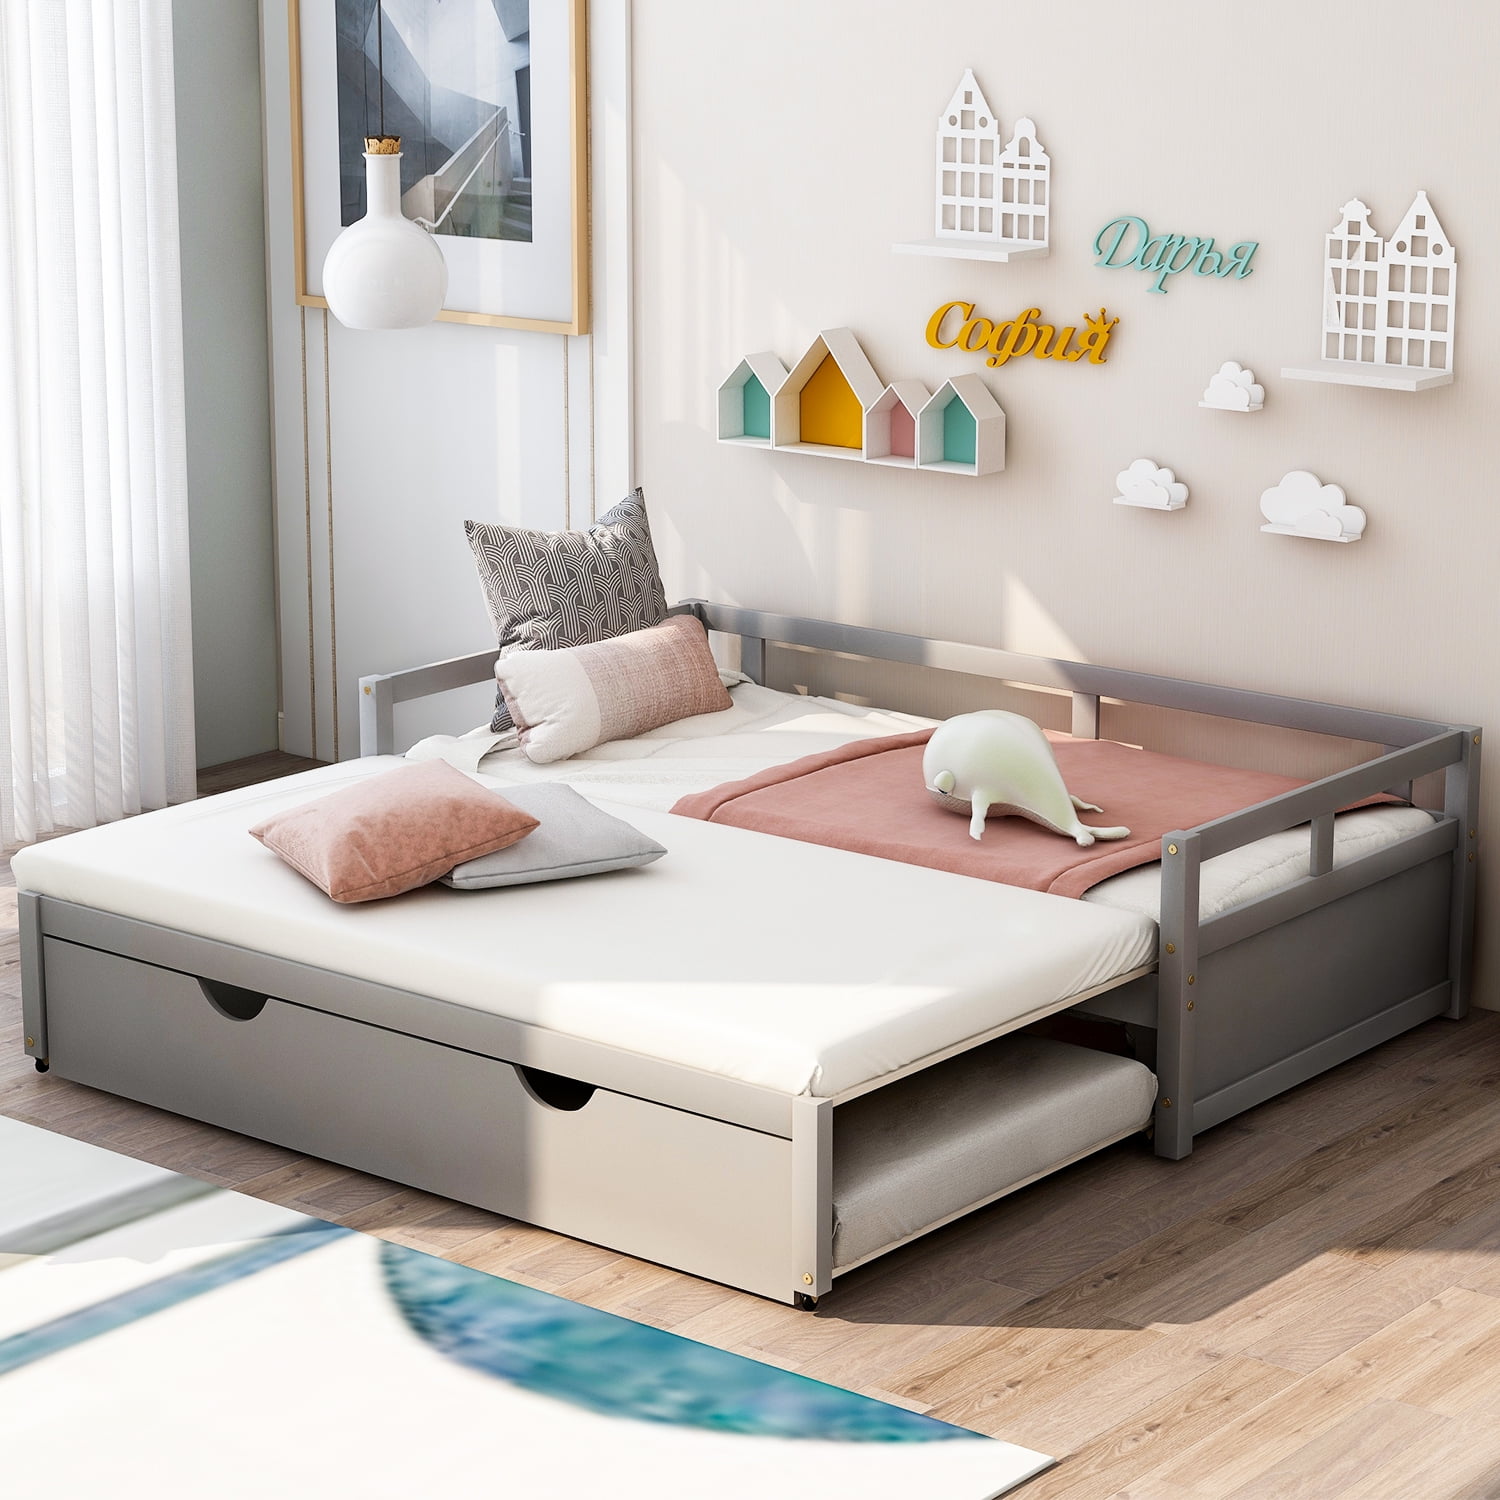 Wooden Twin Daybed Frame Contemporary, Extra Long Twin Pop Up Trundle Bed Frame